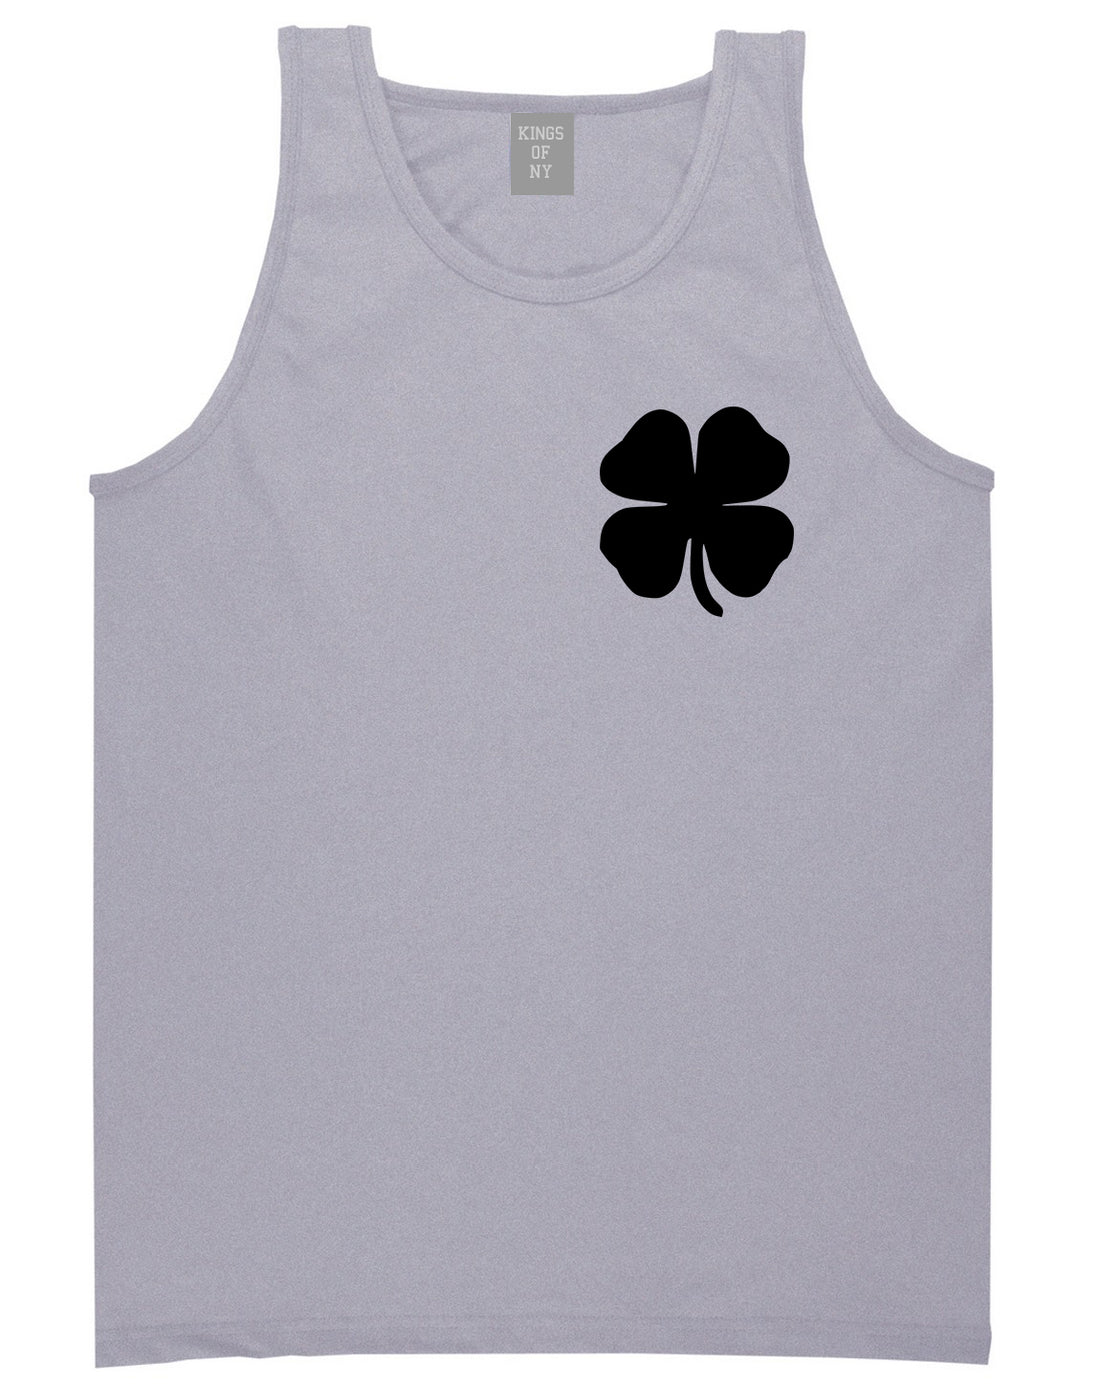 Four Leaf Clover Chest Grey Tank Top Shirt by Kings Of NY